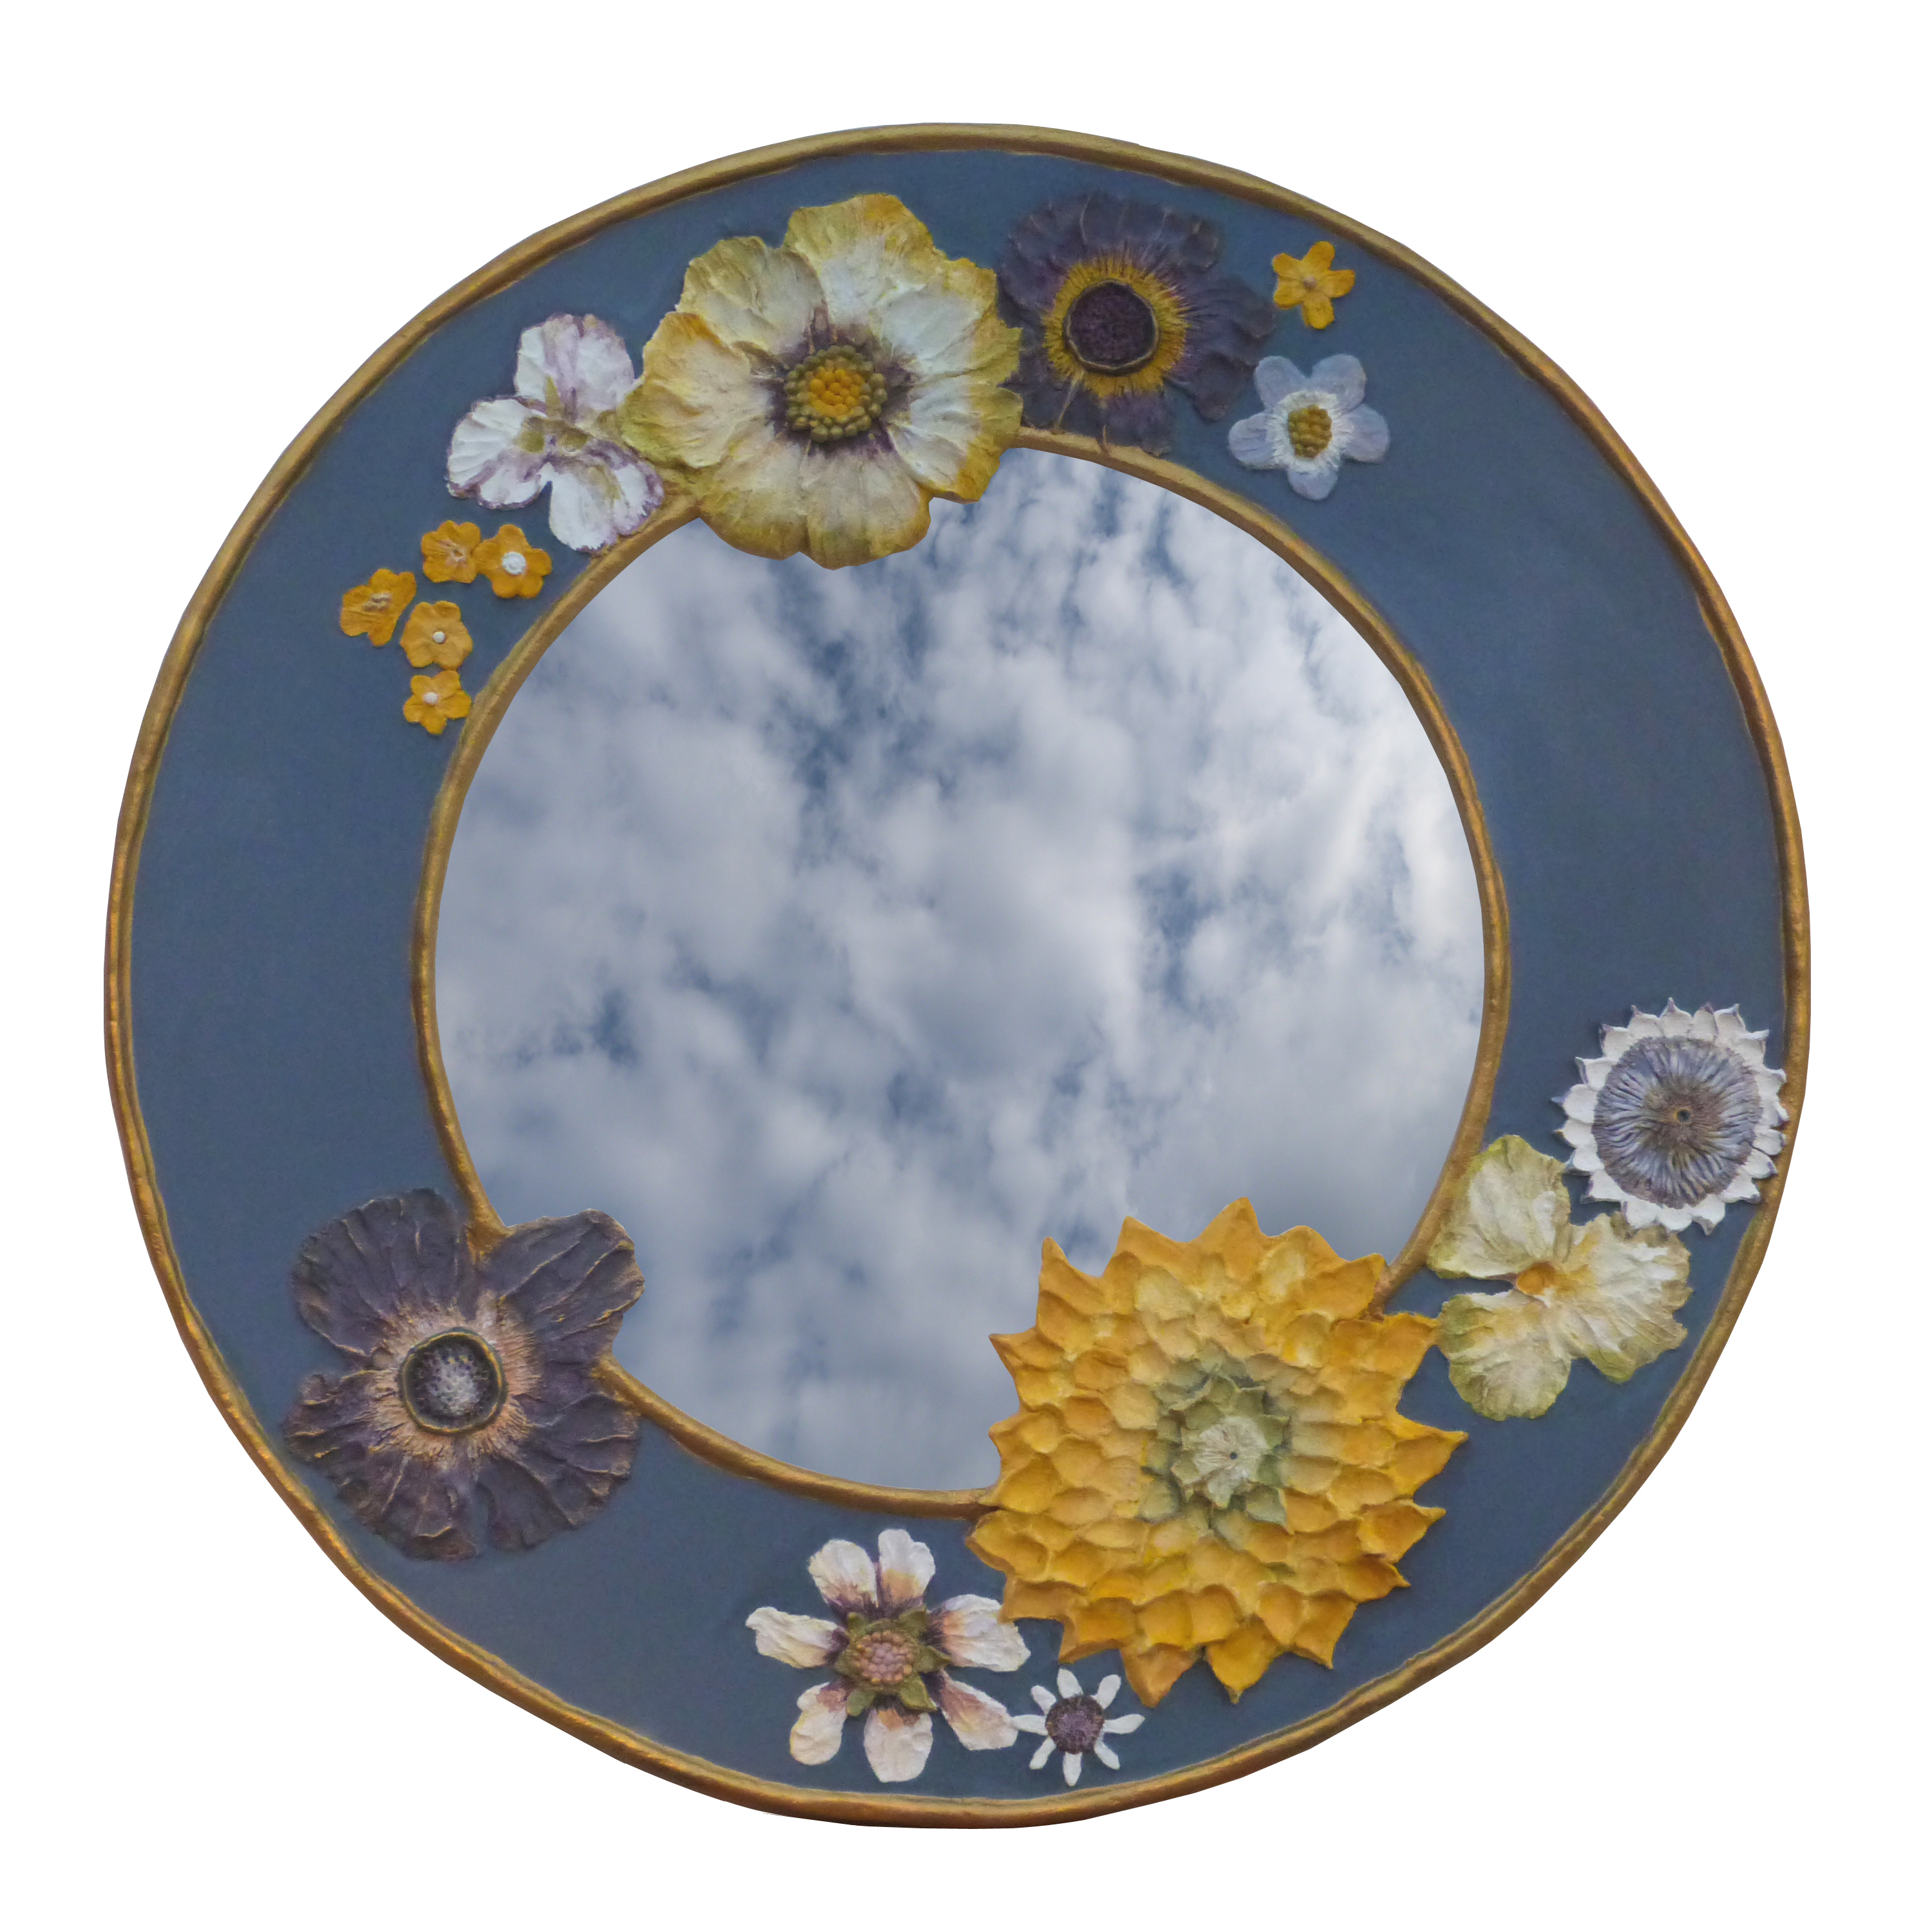 Image of Floral mirror hand crafted by sarah Howarth